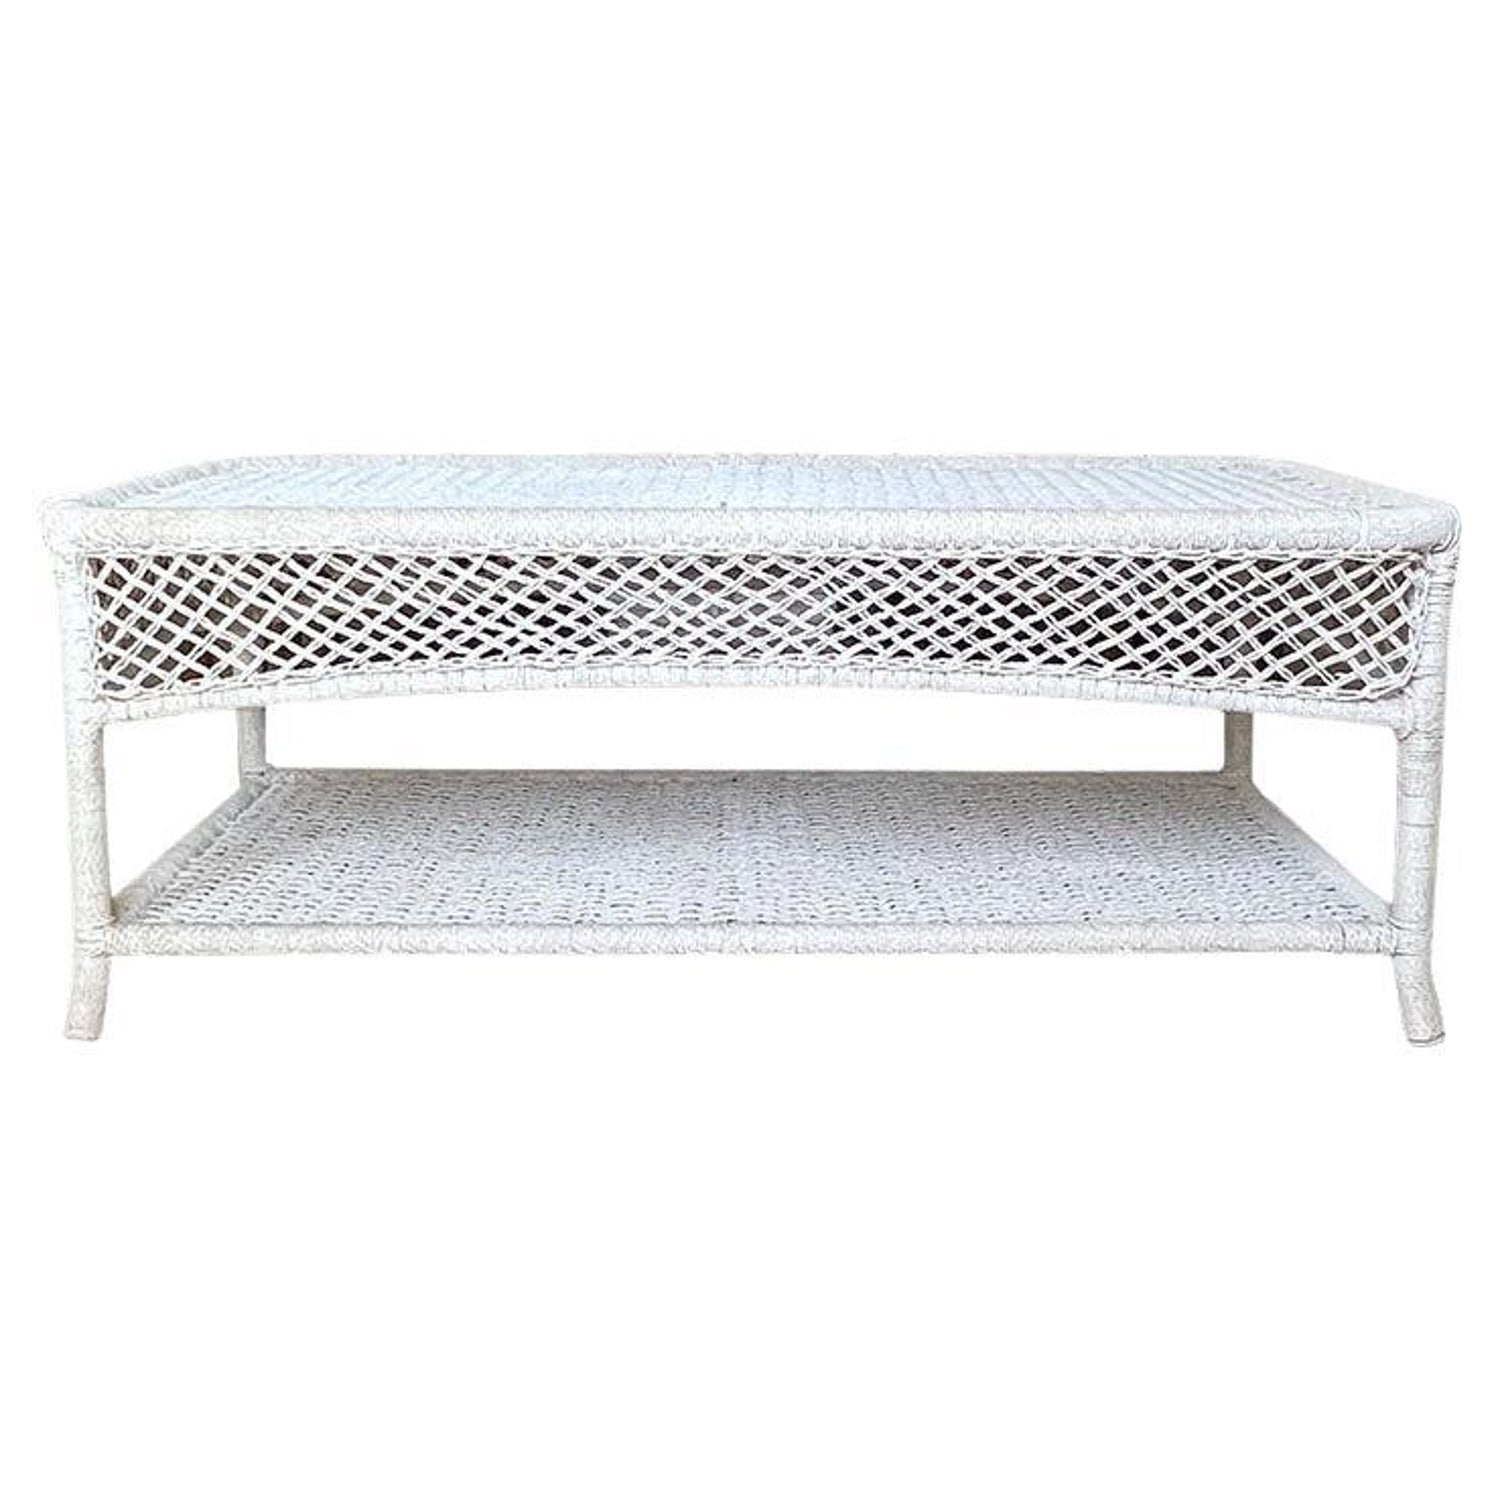 https://a.1stdibscdn.com/rectangular-french-white-rope-wicker-patio-coffee-or-cocktail-table-1940s-for-sale/f_33823/f_355279721690994939637/f_35527972_1690994939905_bg_processed.jpg?width=1500